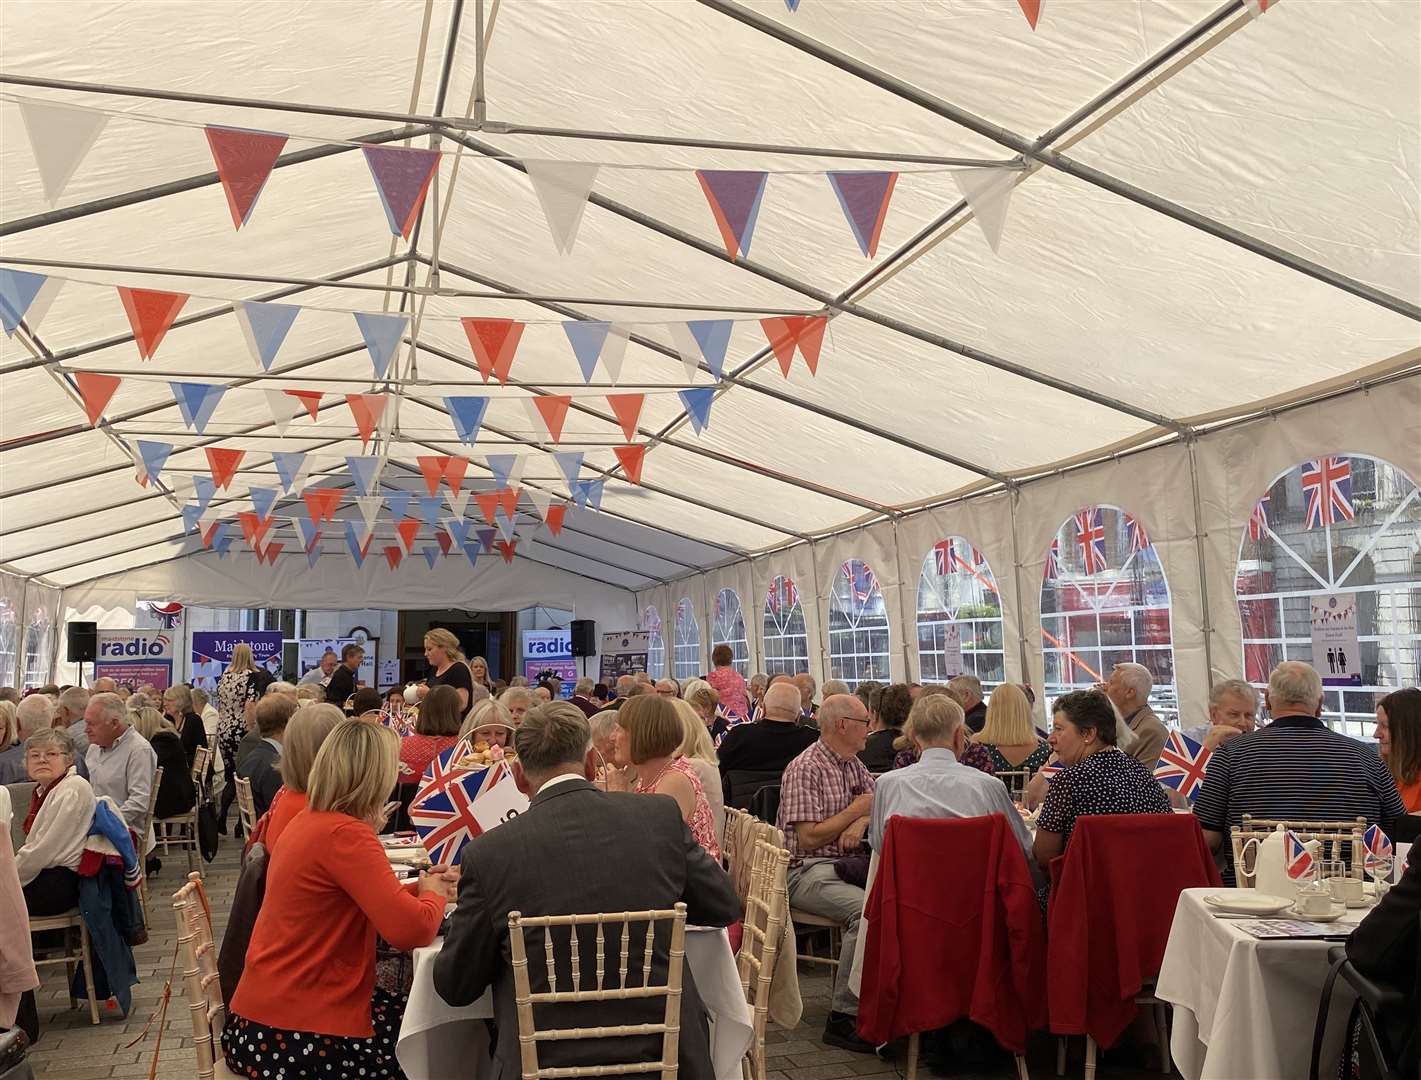 The Mayor's Platinum Jubilee Afternoon Tea Party was held today in Maidstone